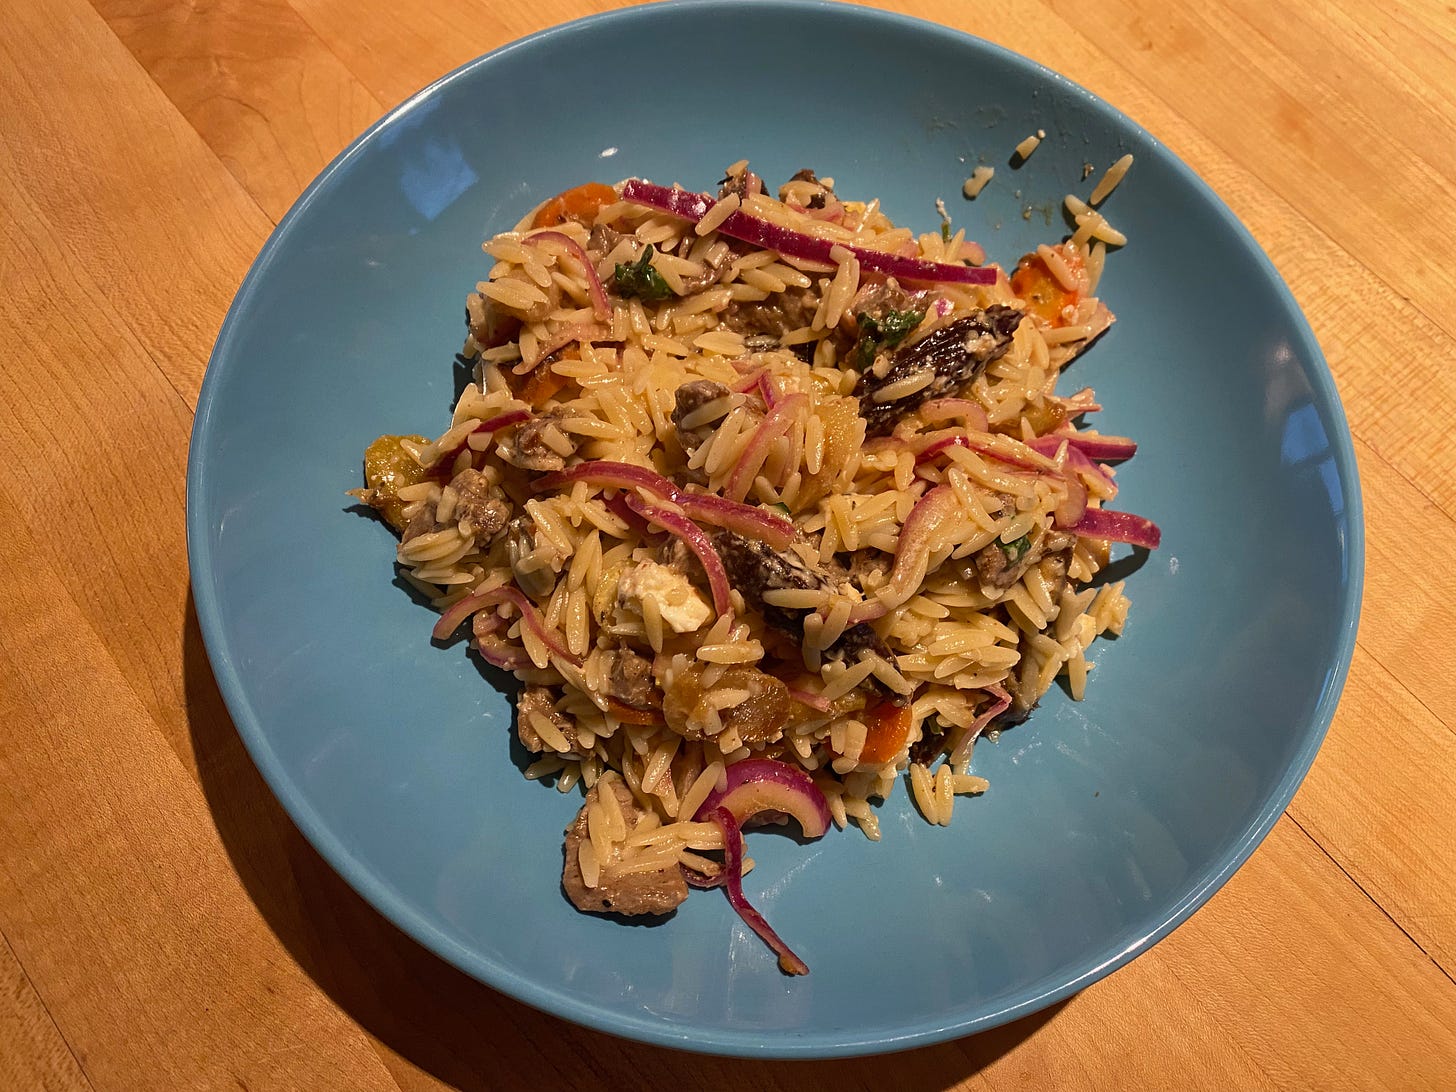 A pile of orzo, slices of lamb, dates, and slivers of pickled red onion in a shallow blue bowl on a kitchen counter.